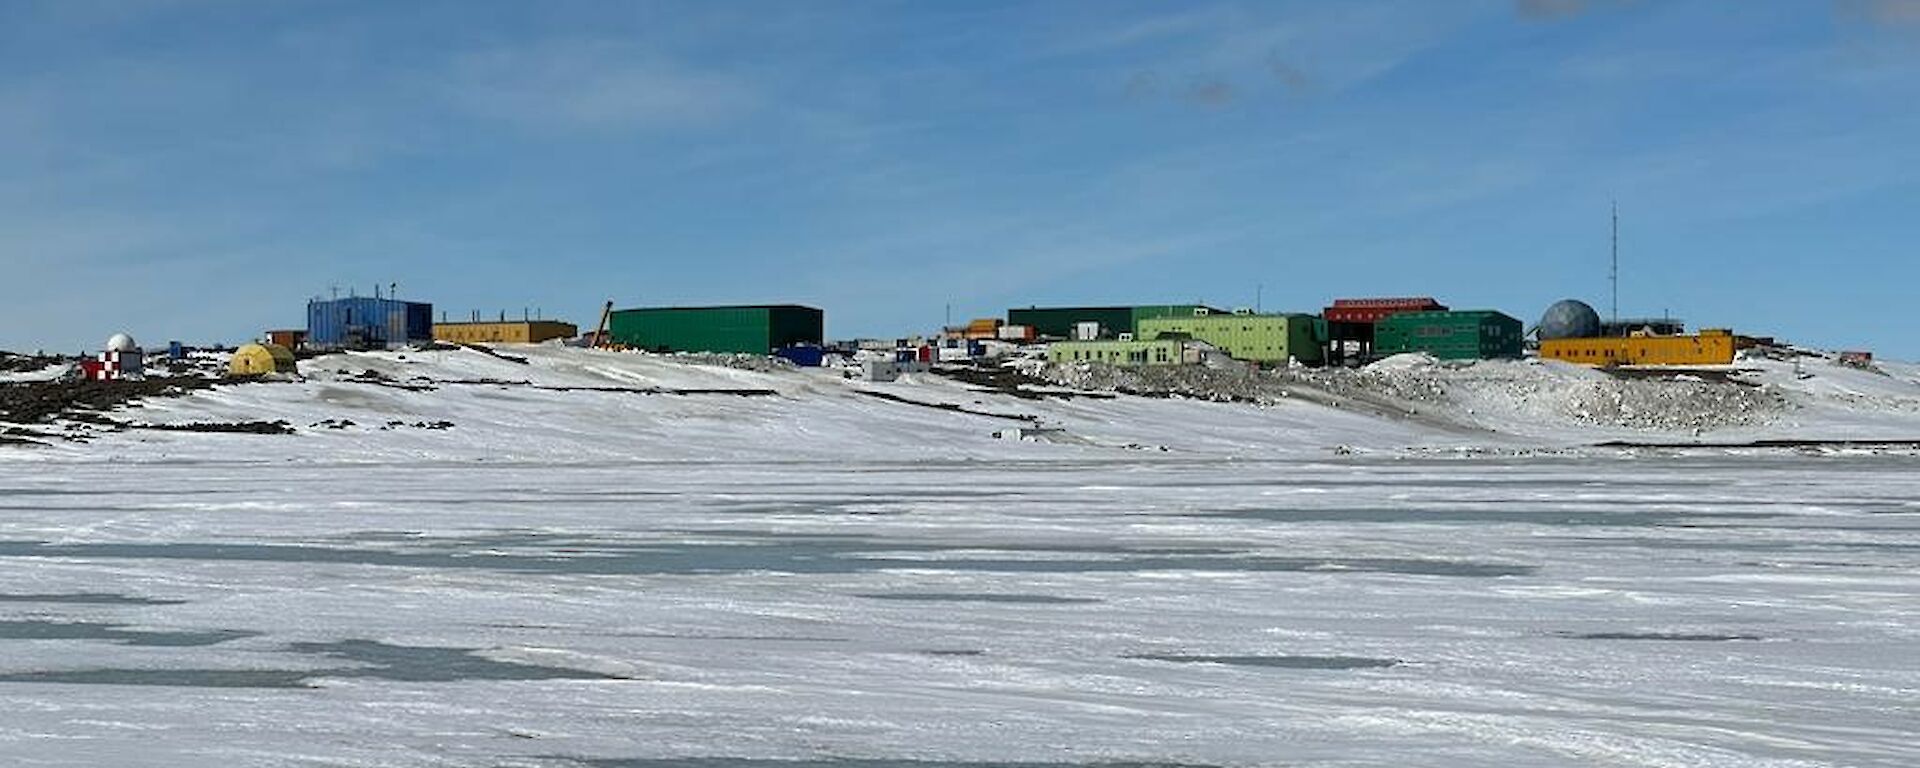 Many colourful buildings sitting amongst hills in an icy snow-covered landscape with sea-ice in the foreground